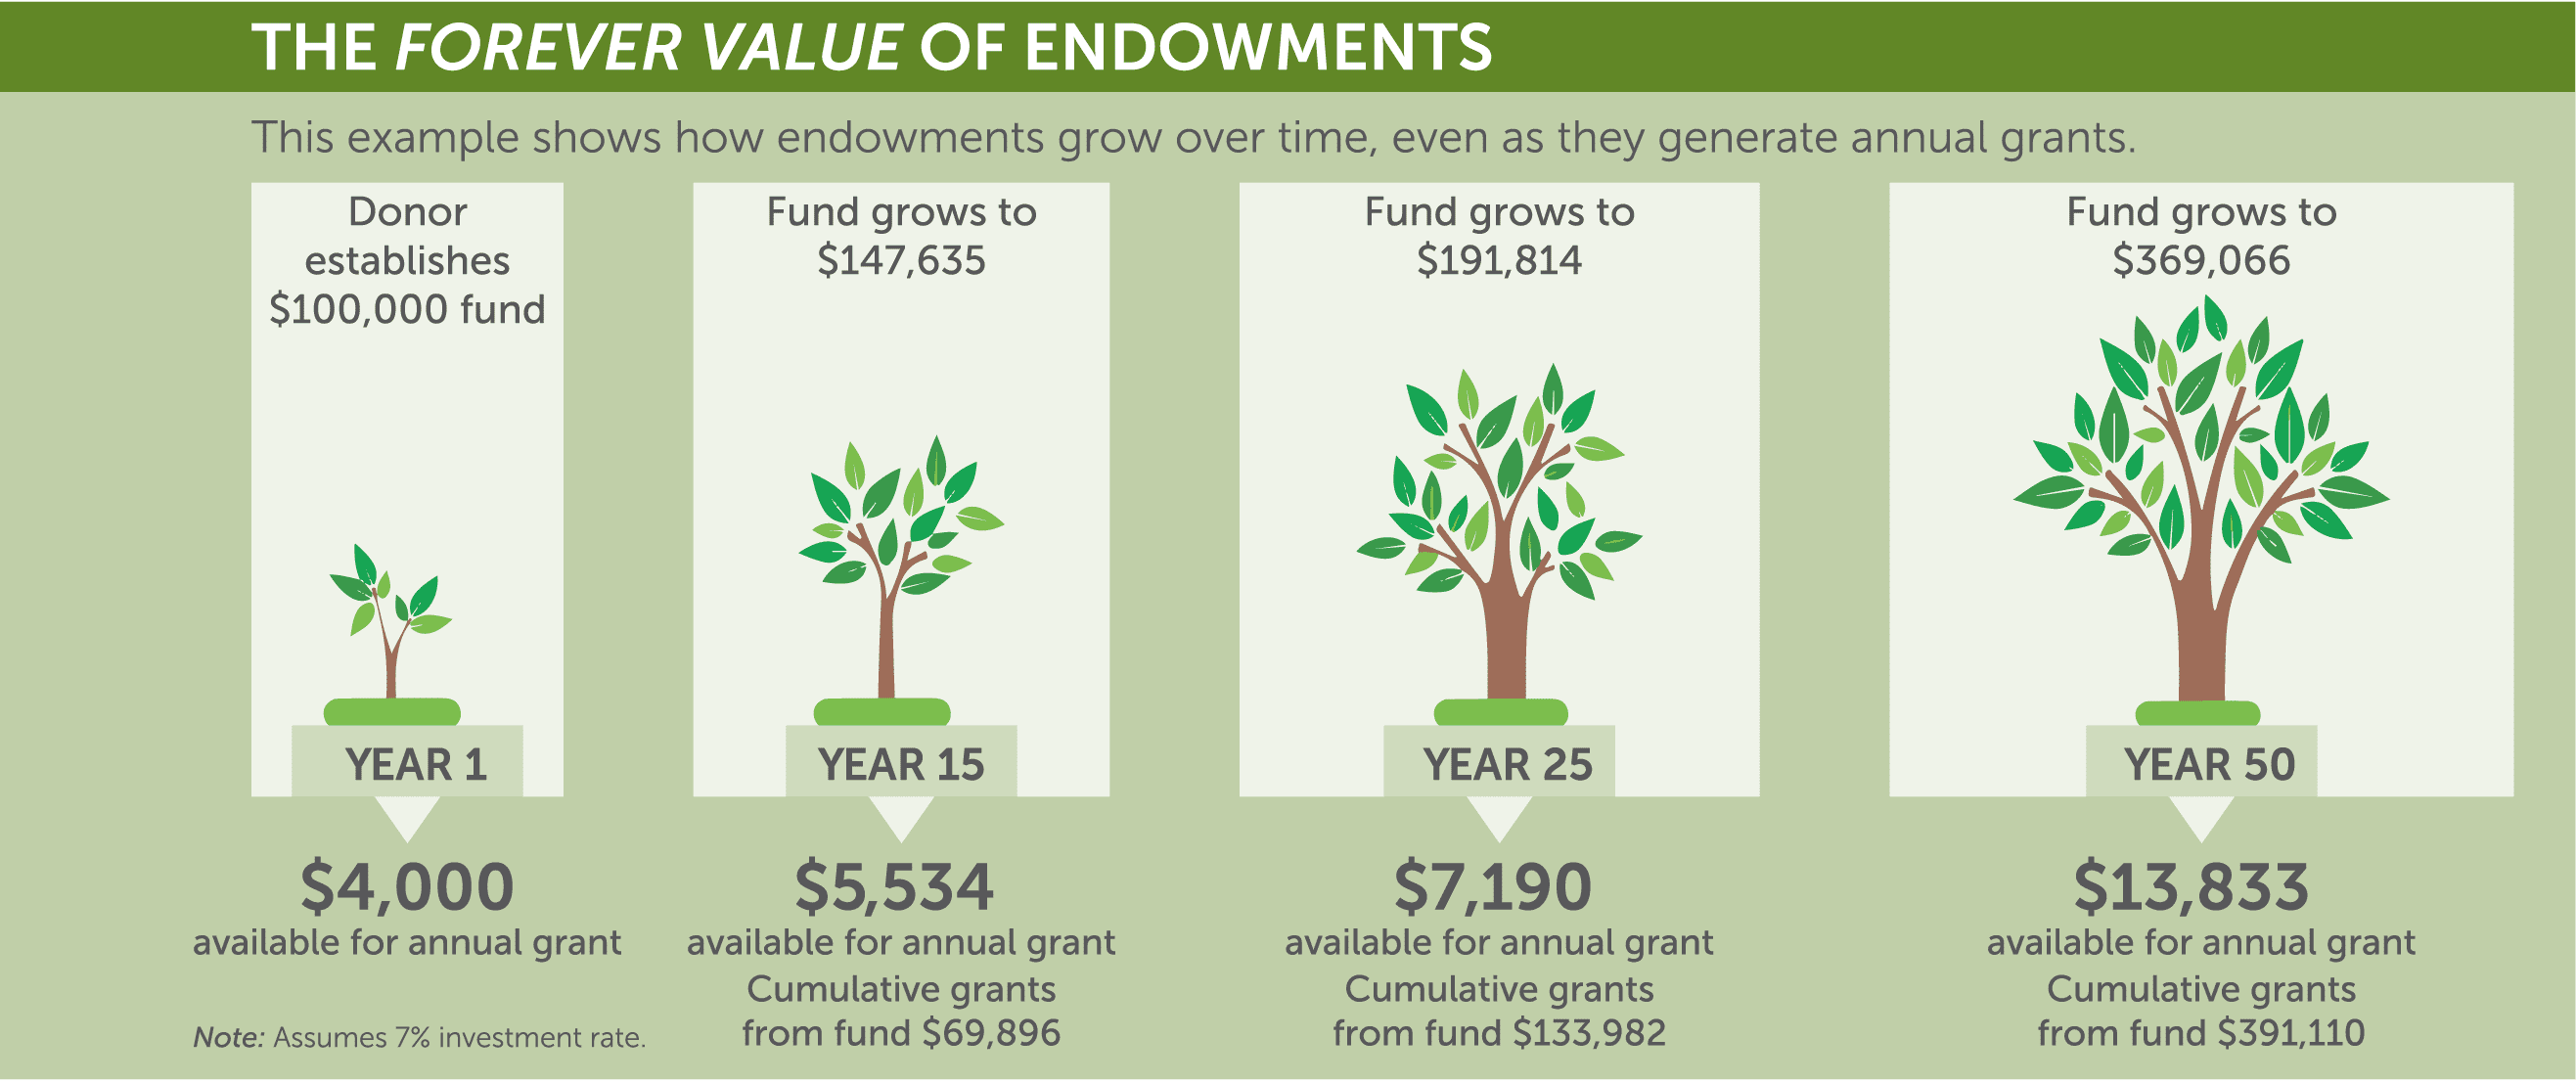 The Forever Value of Endowments